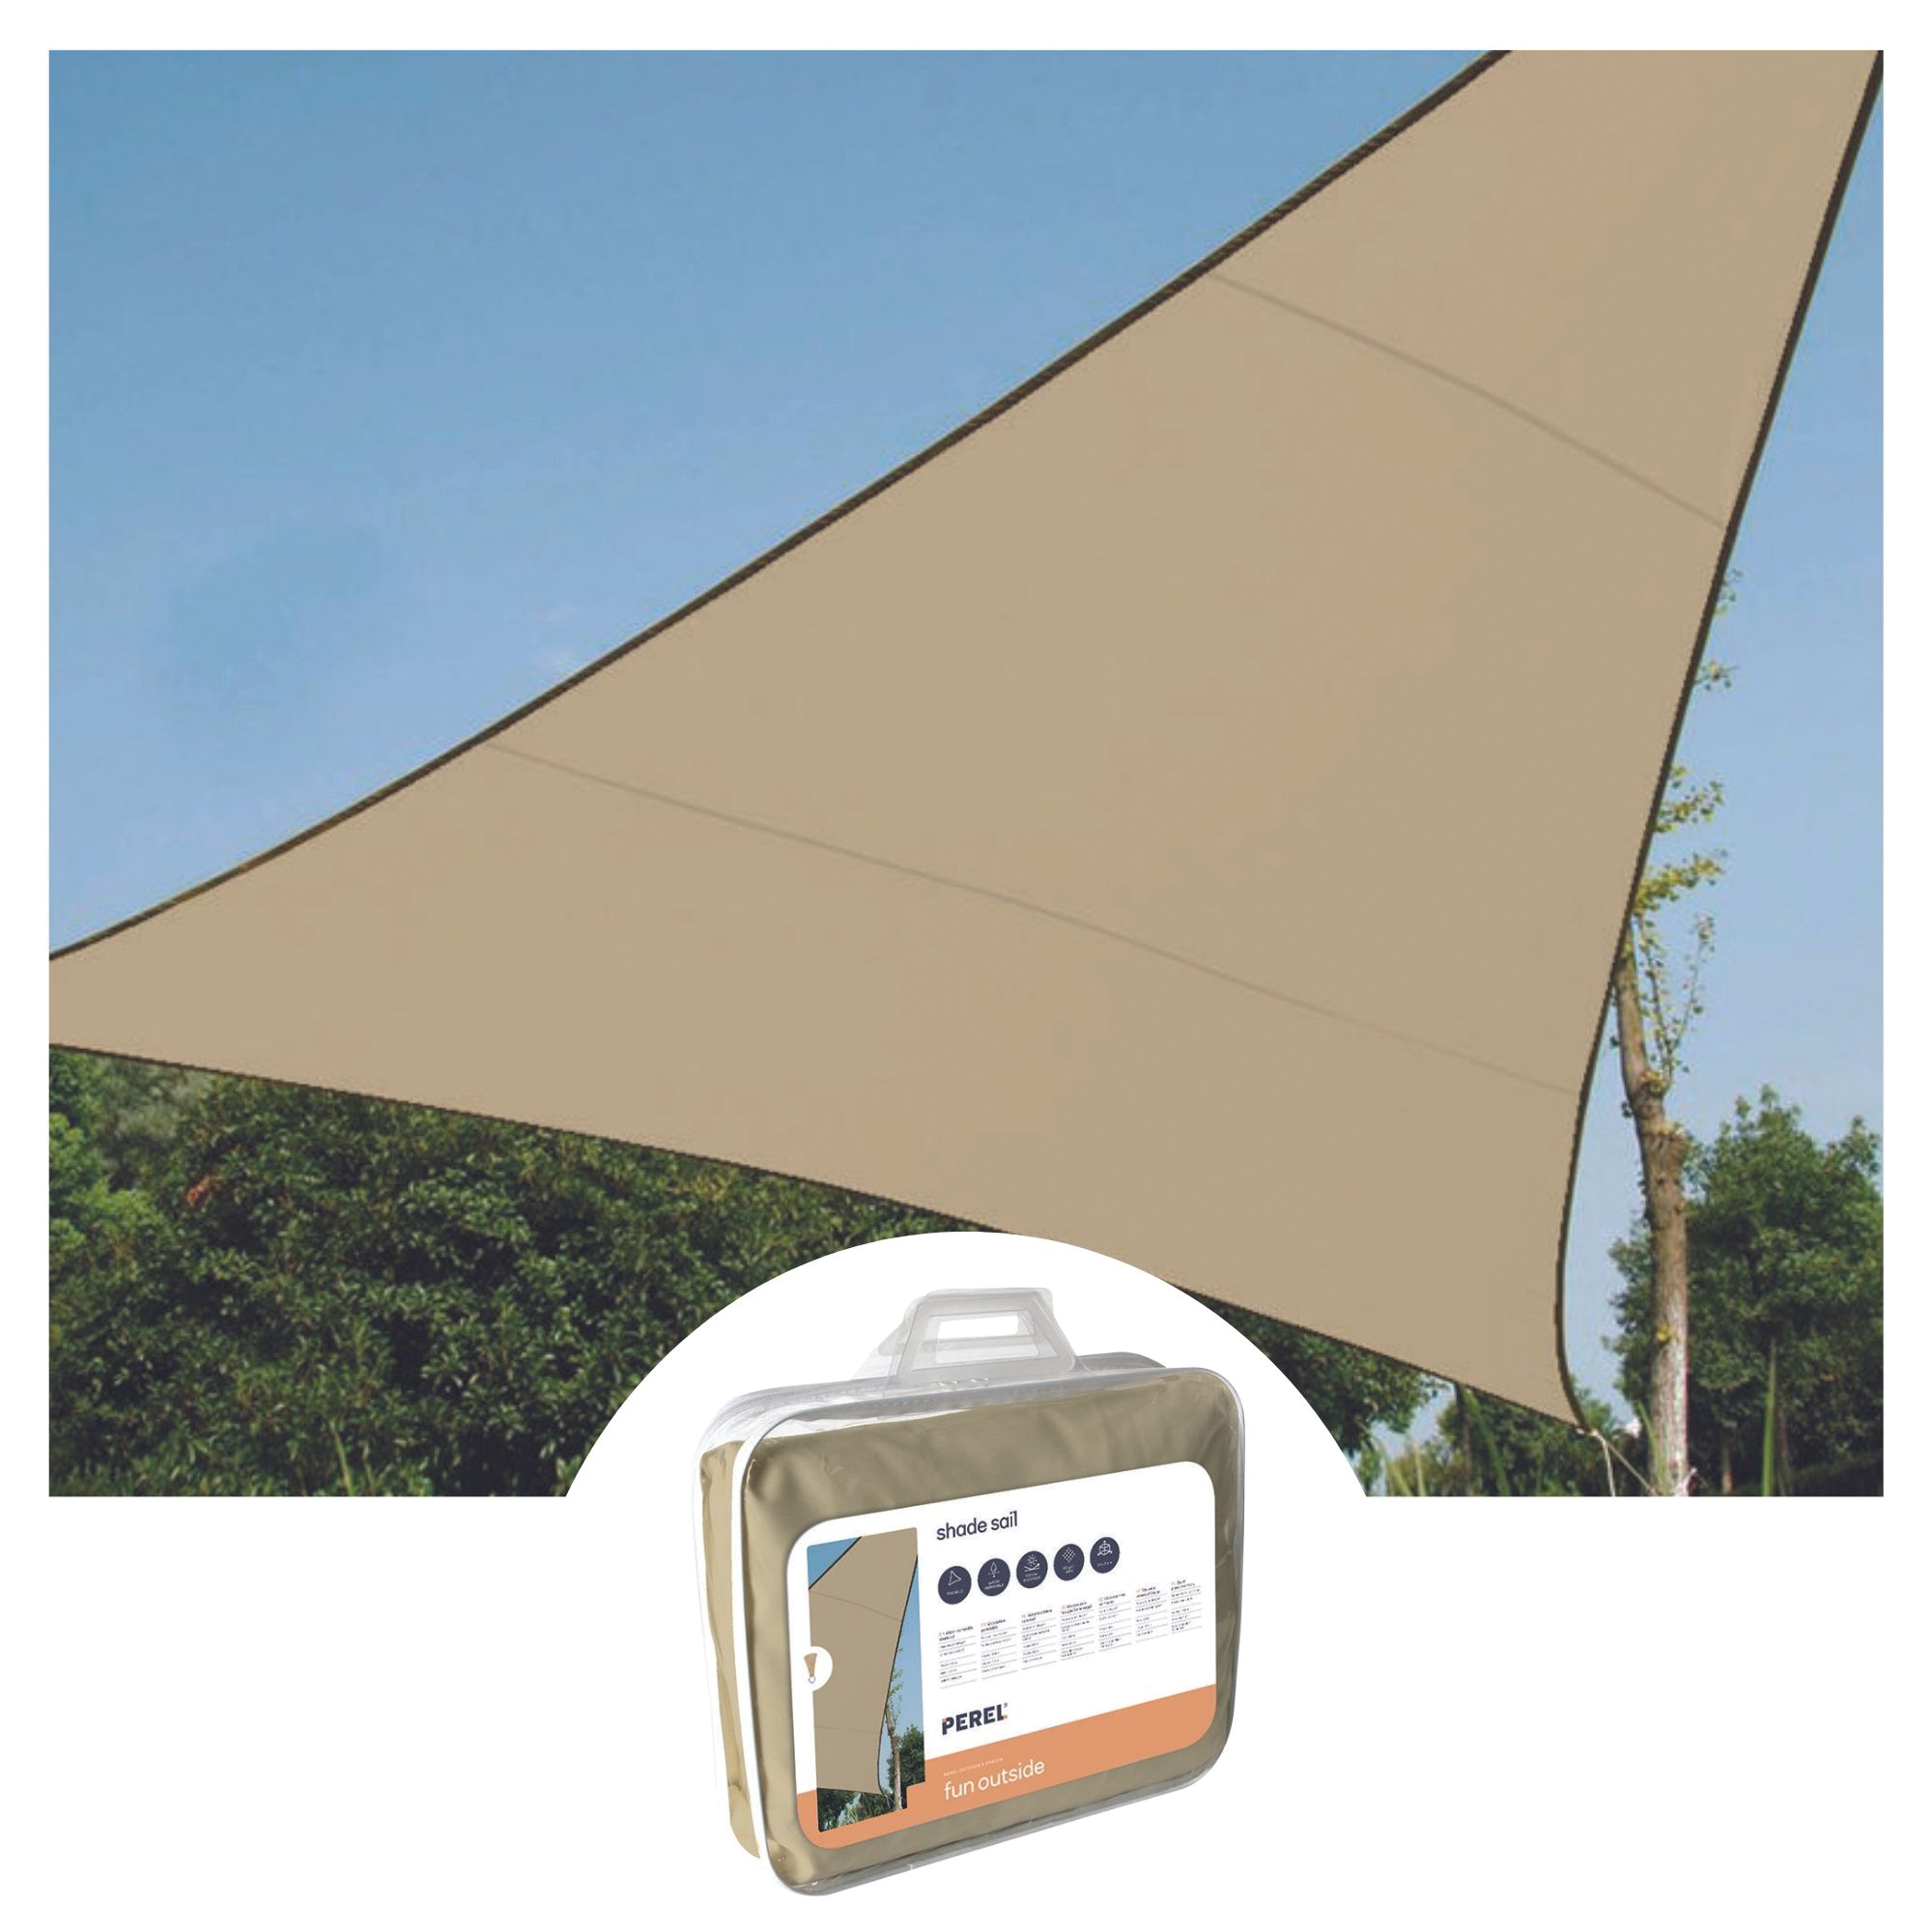 VOILE SOLAIRE PERMABLE - TRIANGLE 3.6 x 3.6 x 3.6m, couleur: beige